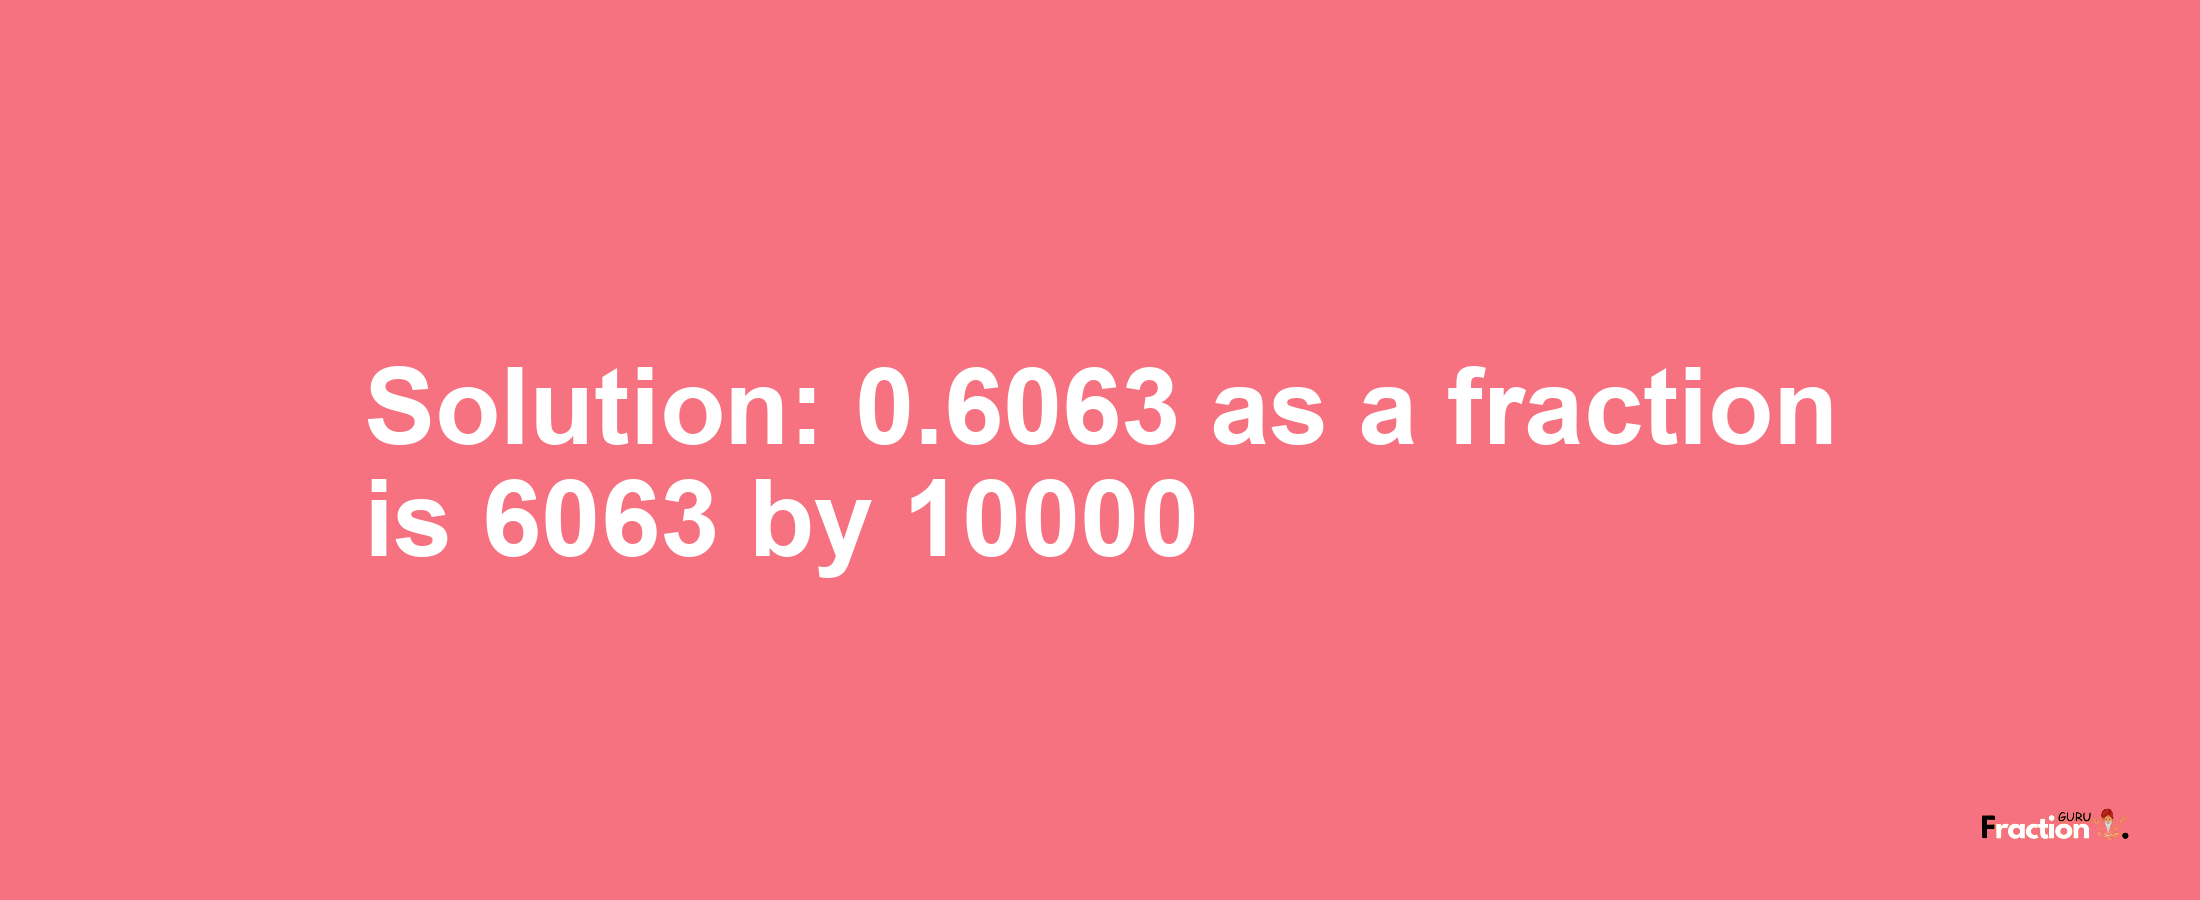 Solution:0.6063 as a fraction is 6063/10000